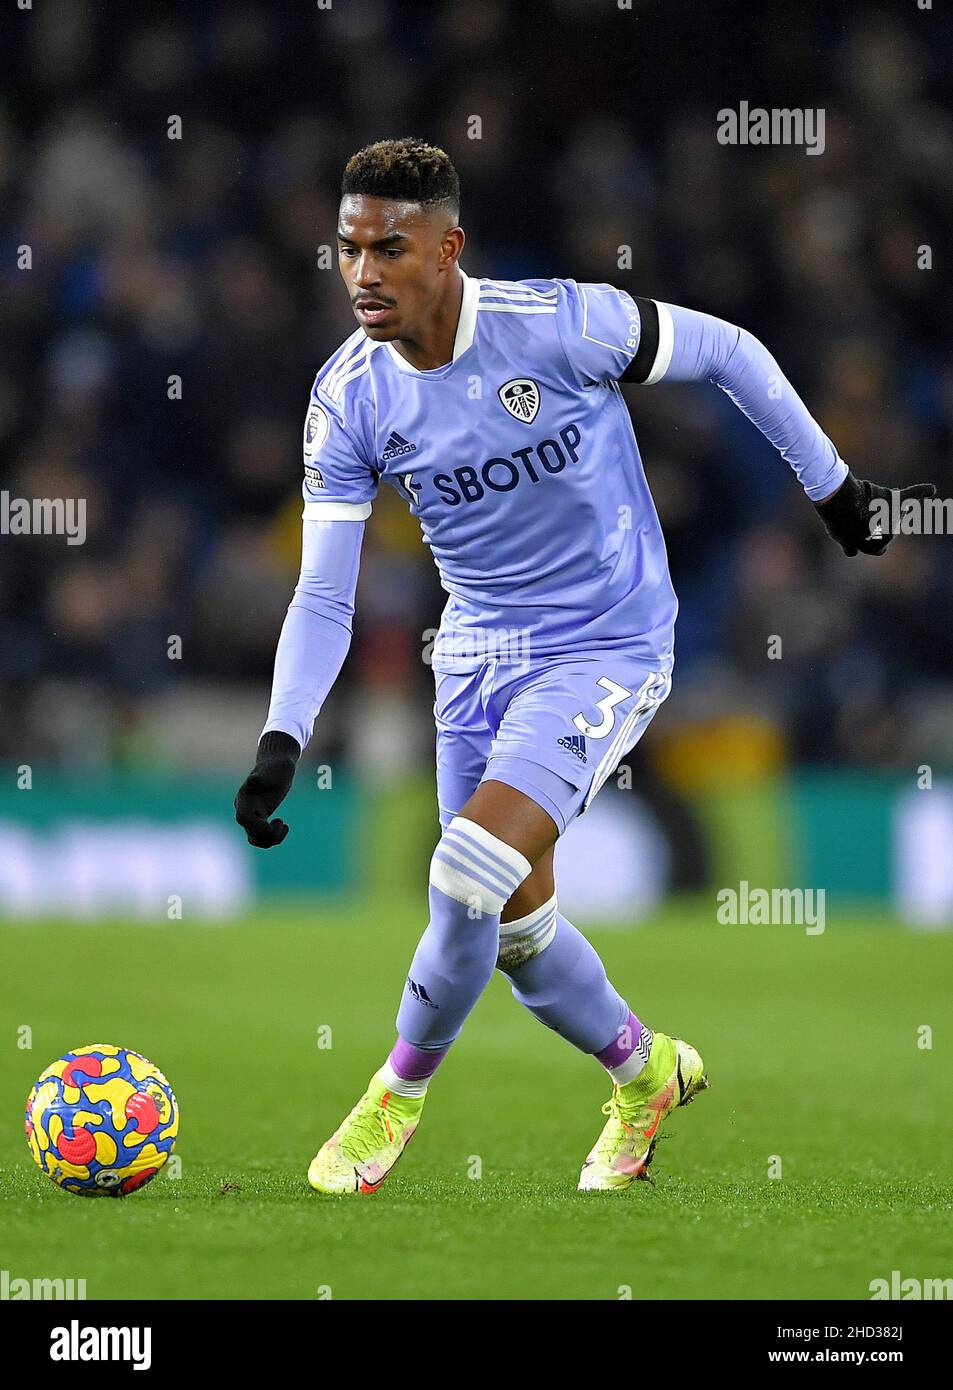 Junior Firpo of Leeds United - Brighton & Hove Albion v Leeds United, Premier League, Amex Stadium, Brighton, UK - 27th November 2021  Editorial Use Only - DataCo restrictions apply Stock Photo